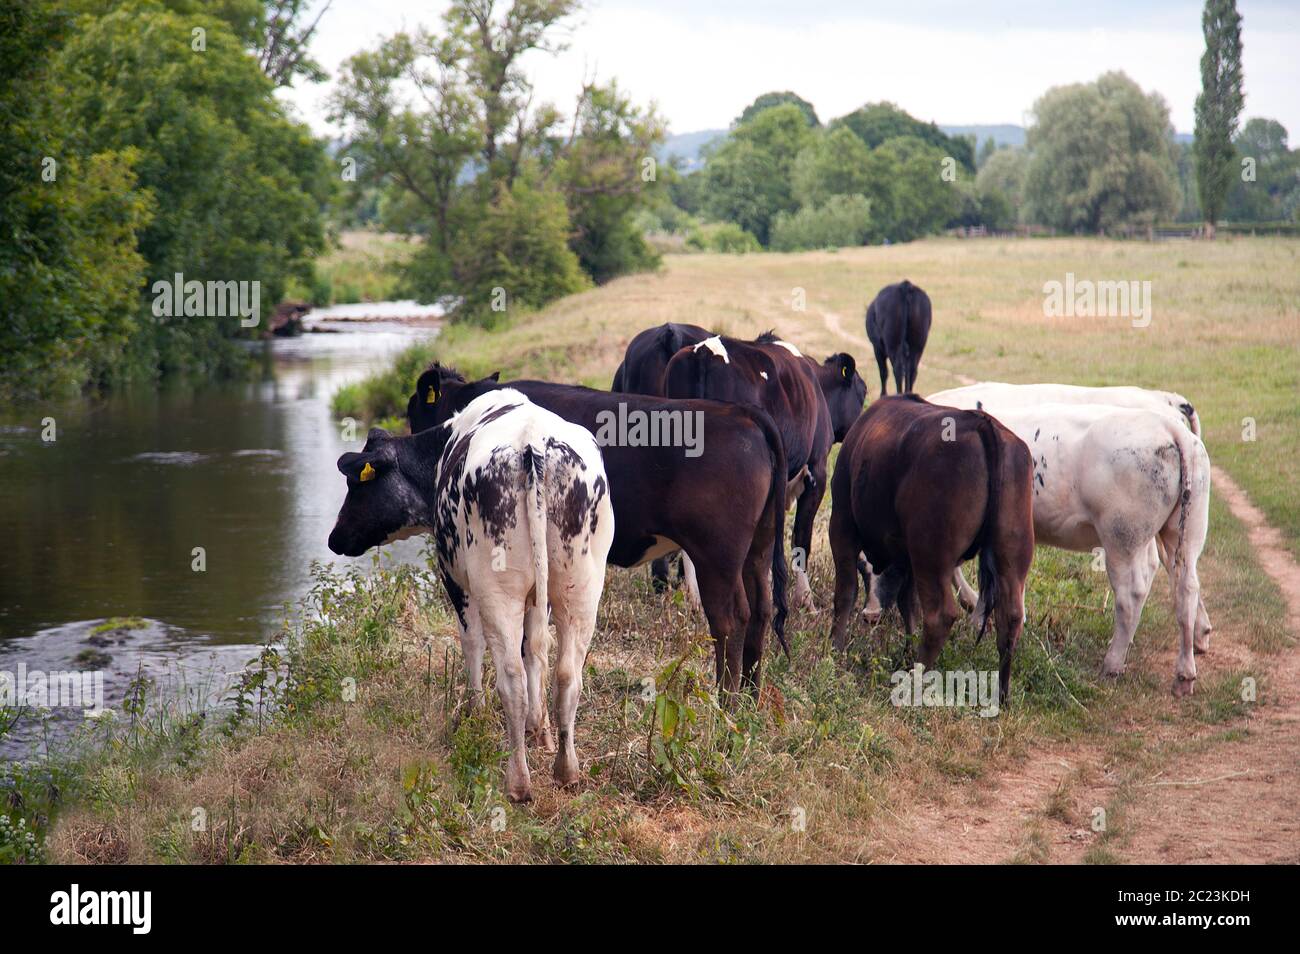 Bucolic water meadow with cattle Stock Photo